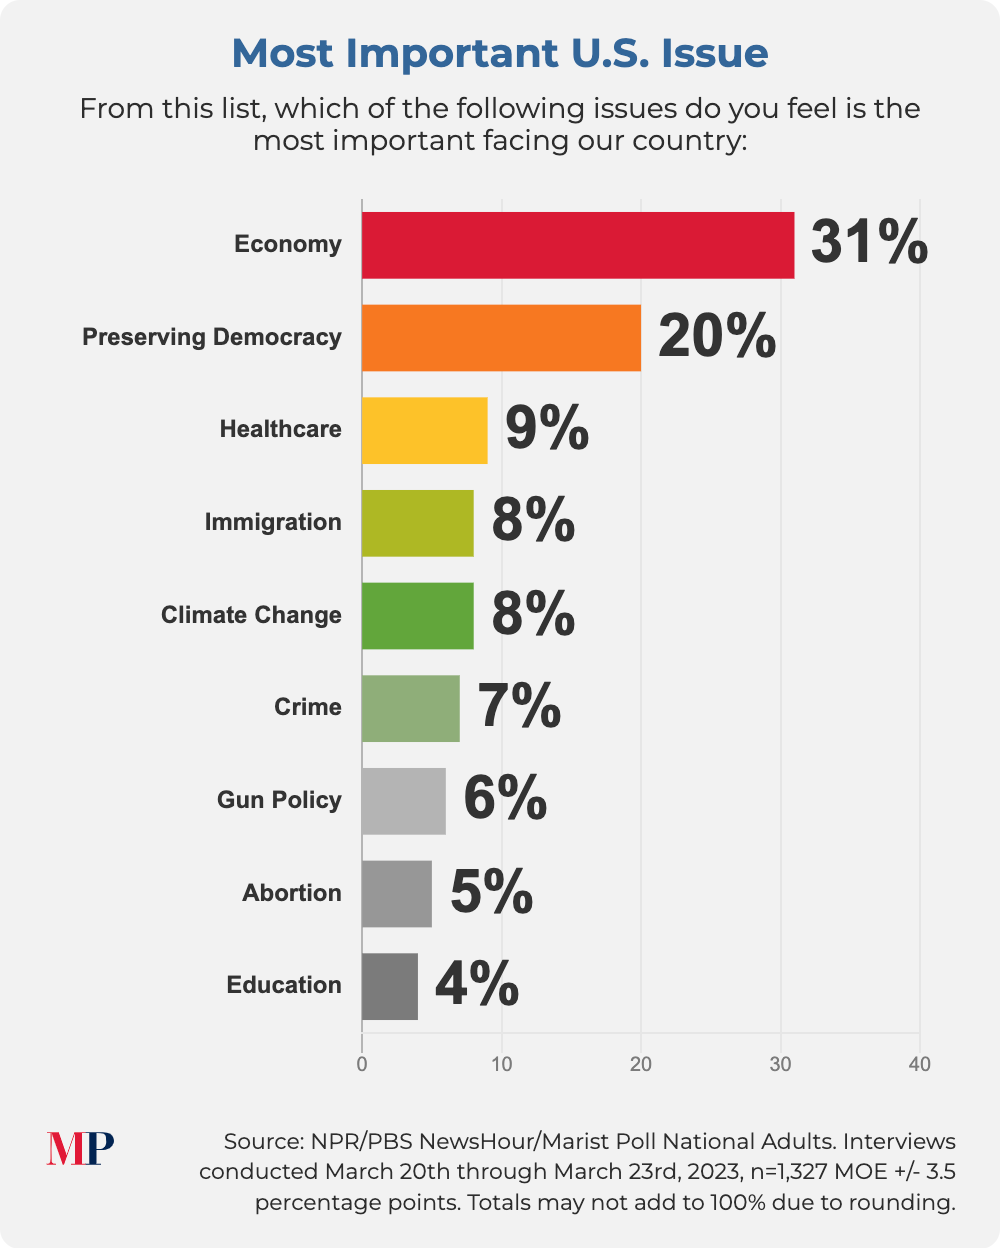 A screenshot of a poll showing Americans' top concerns: Economy, 31%, Preserving Democracy, 20%, Healthcare, 9%, Immigration, 8%, Climate Change, 8%, Crime, 7%, Gun Policy, 6%, Abortion, 5%, Education, 4%. Margin of error is plus or minus 3 percent.